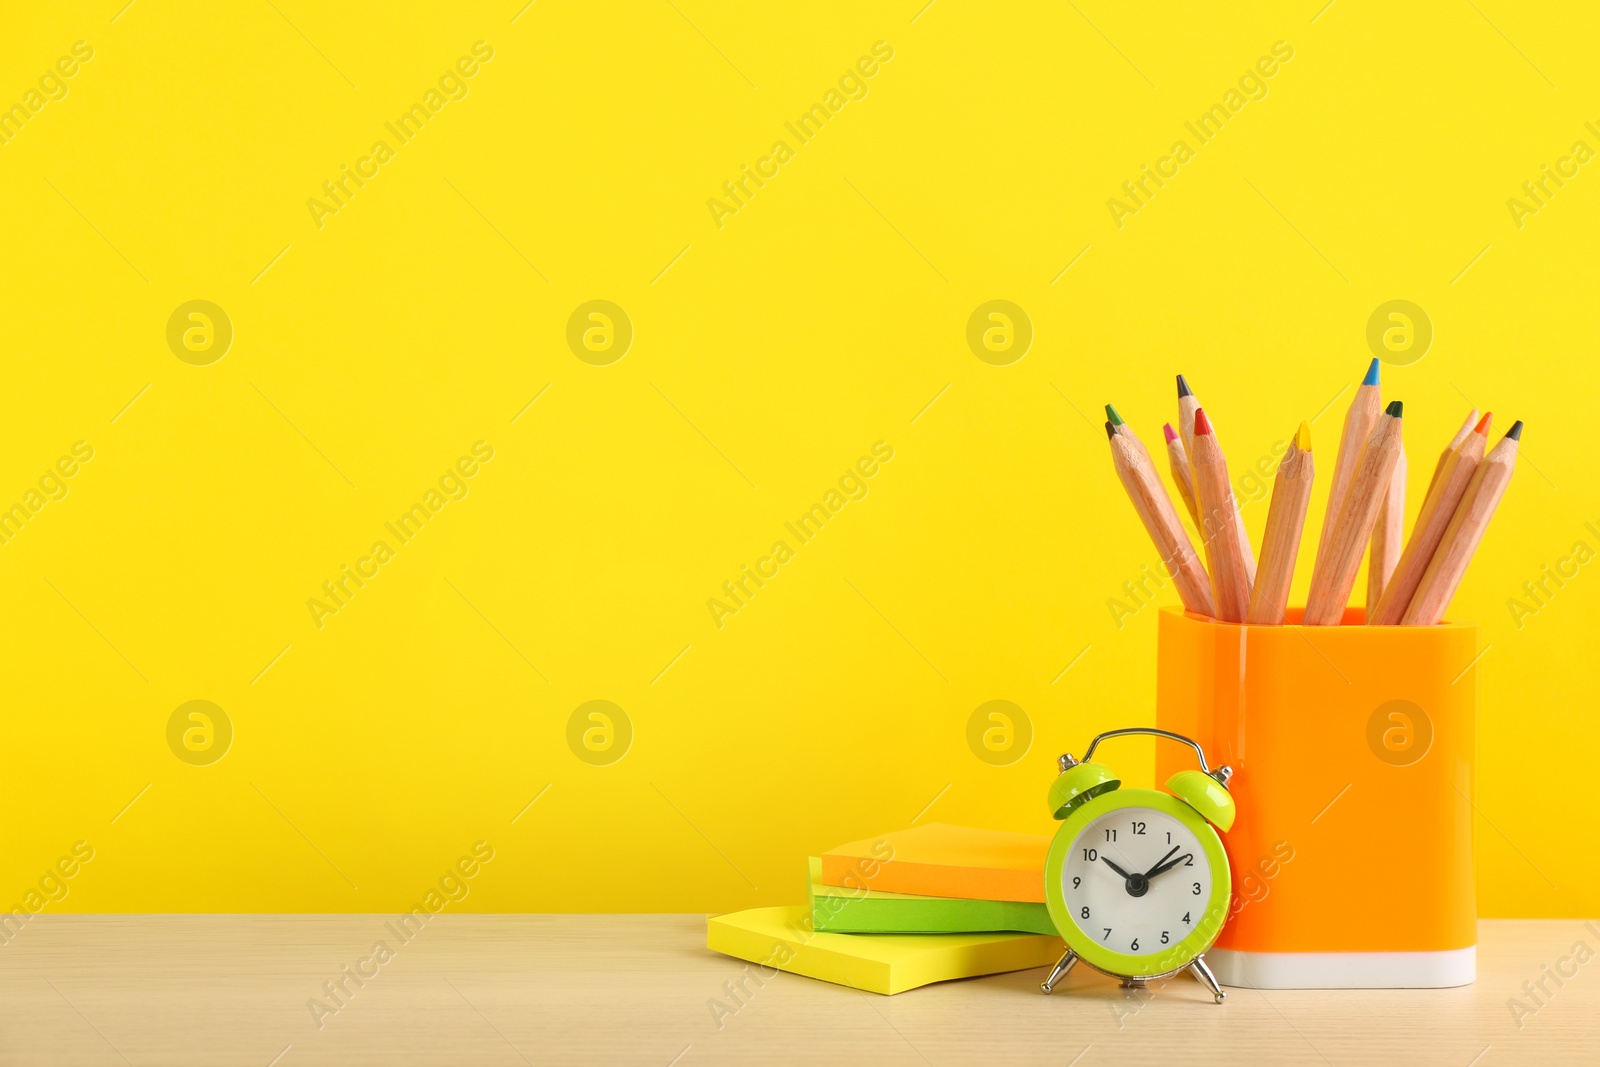 Photo of Different school stationery and alarm clock on table against yellow background, space for text. Back to school